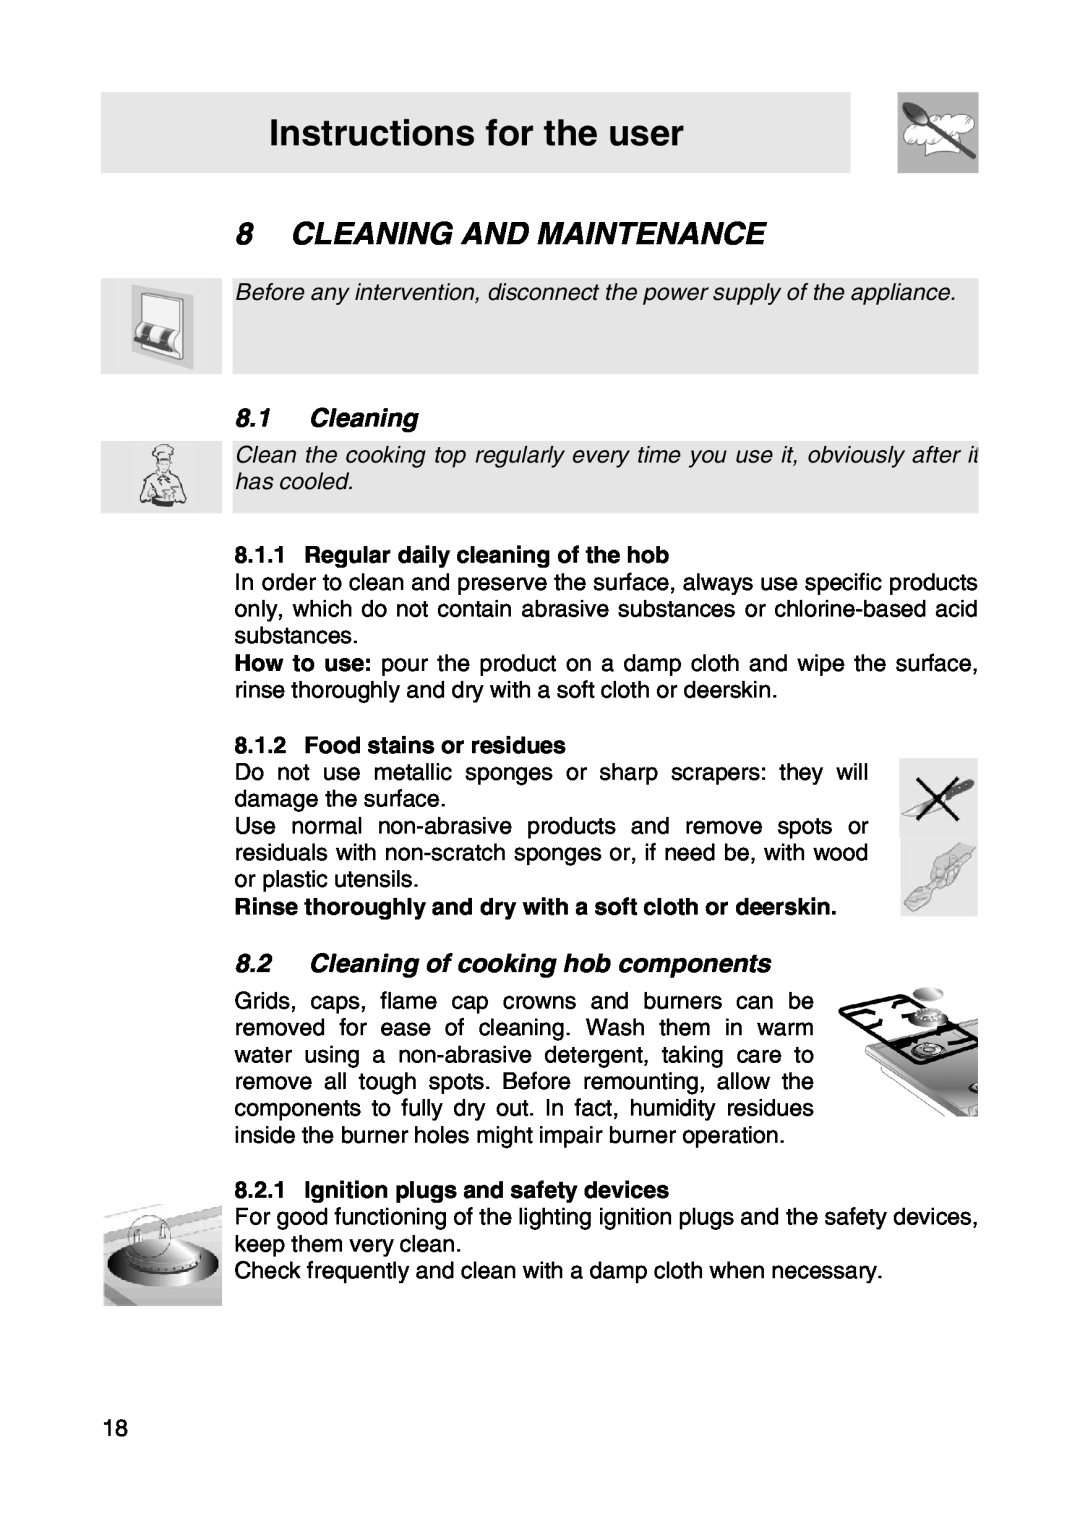 Smeg NCT685CHK Cleaning And Maintenance, 8.1Cleaning, 8.2Cleaning of cooking hob components, Instructions for the user 